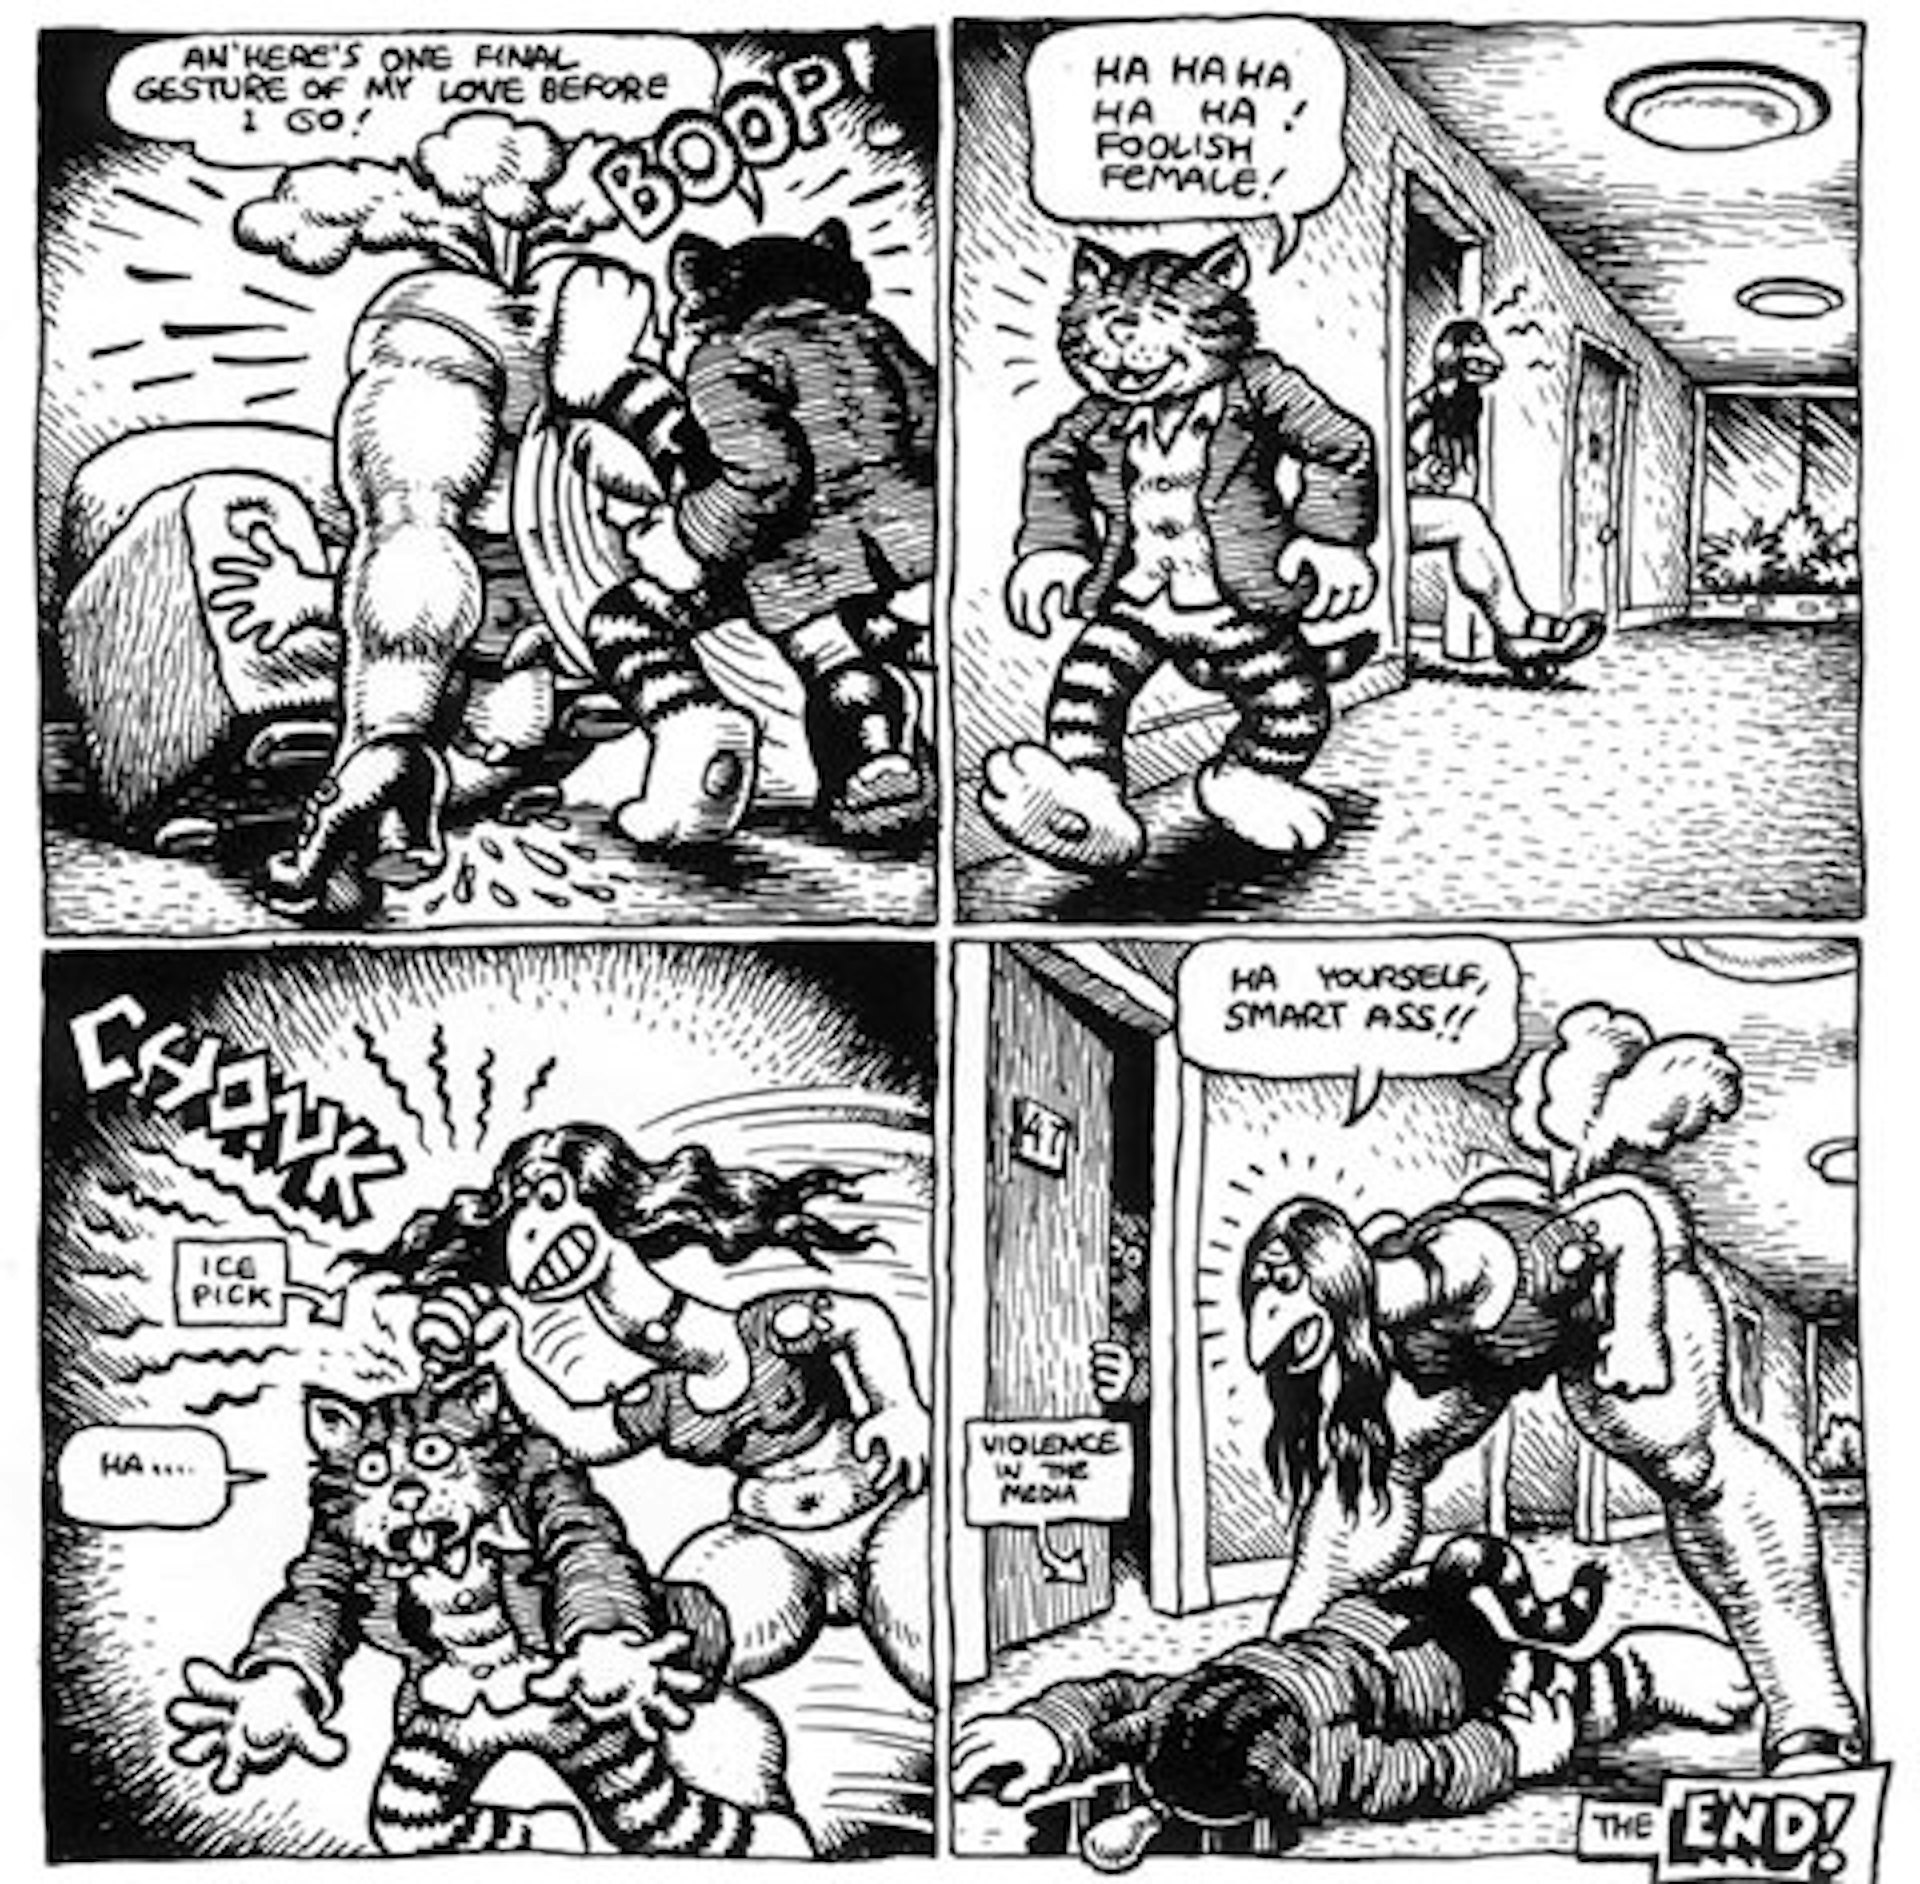 crumb_end_of_fritz